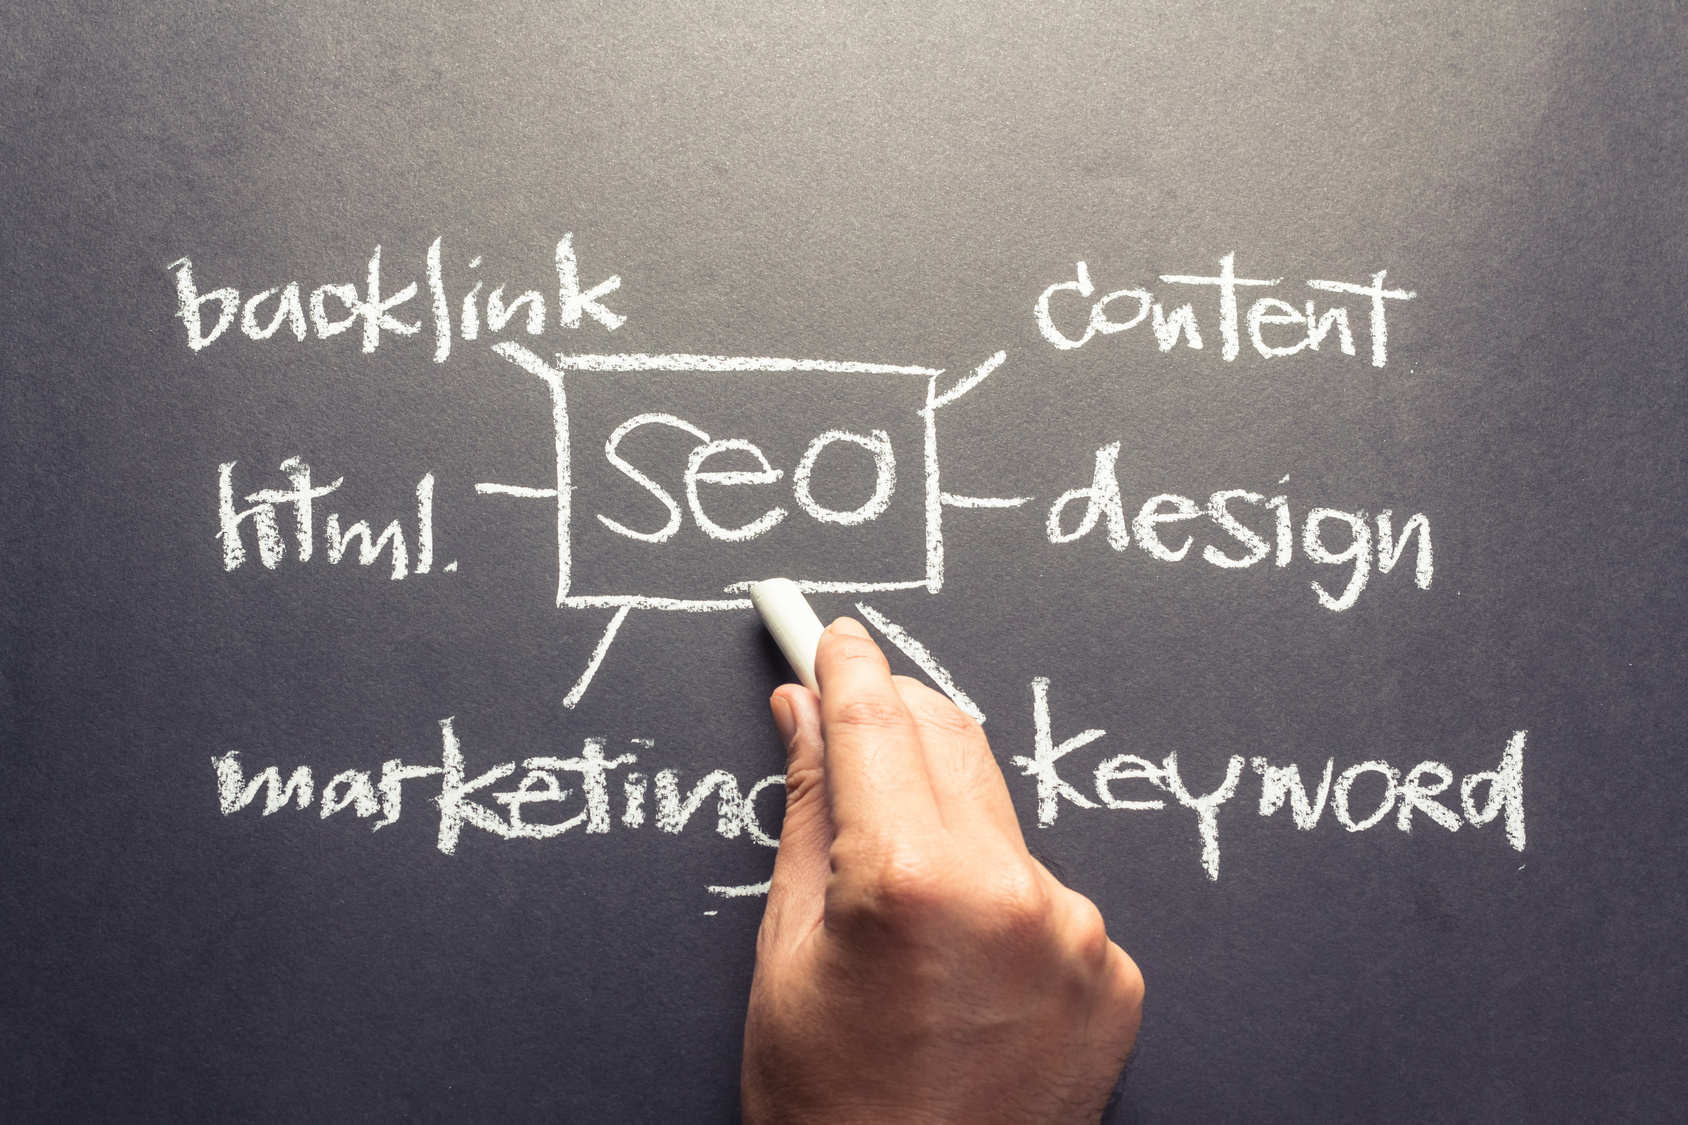 Consider These Questions When Hiring an SEO Firm